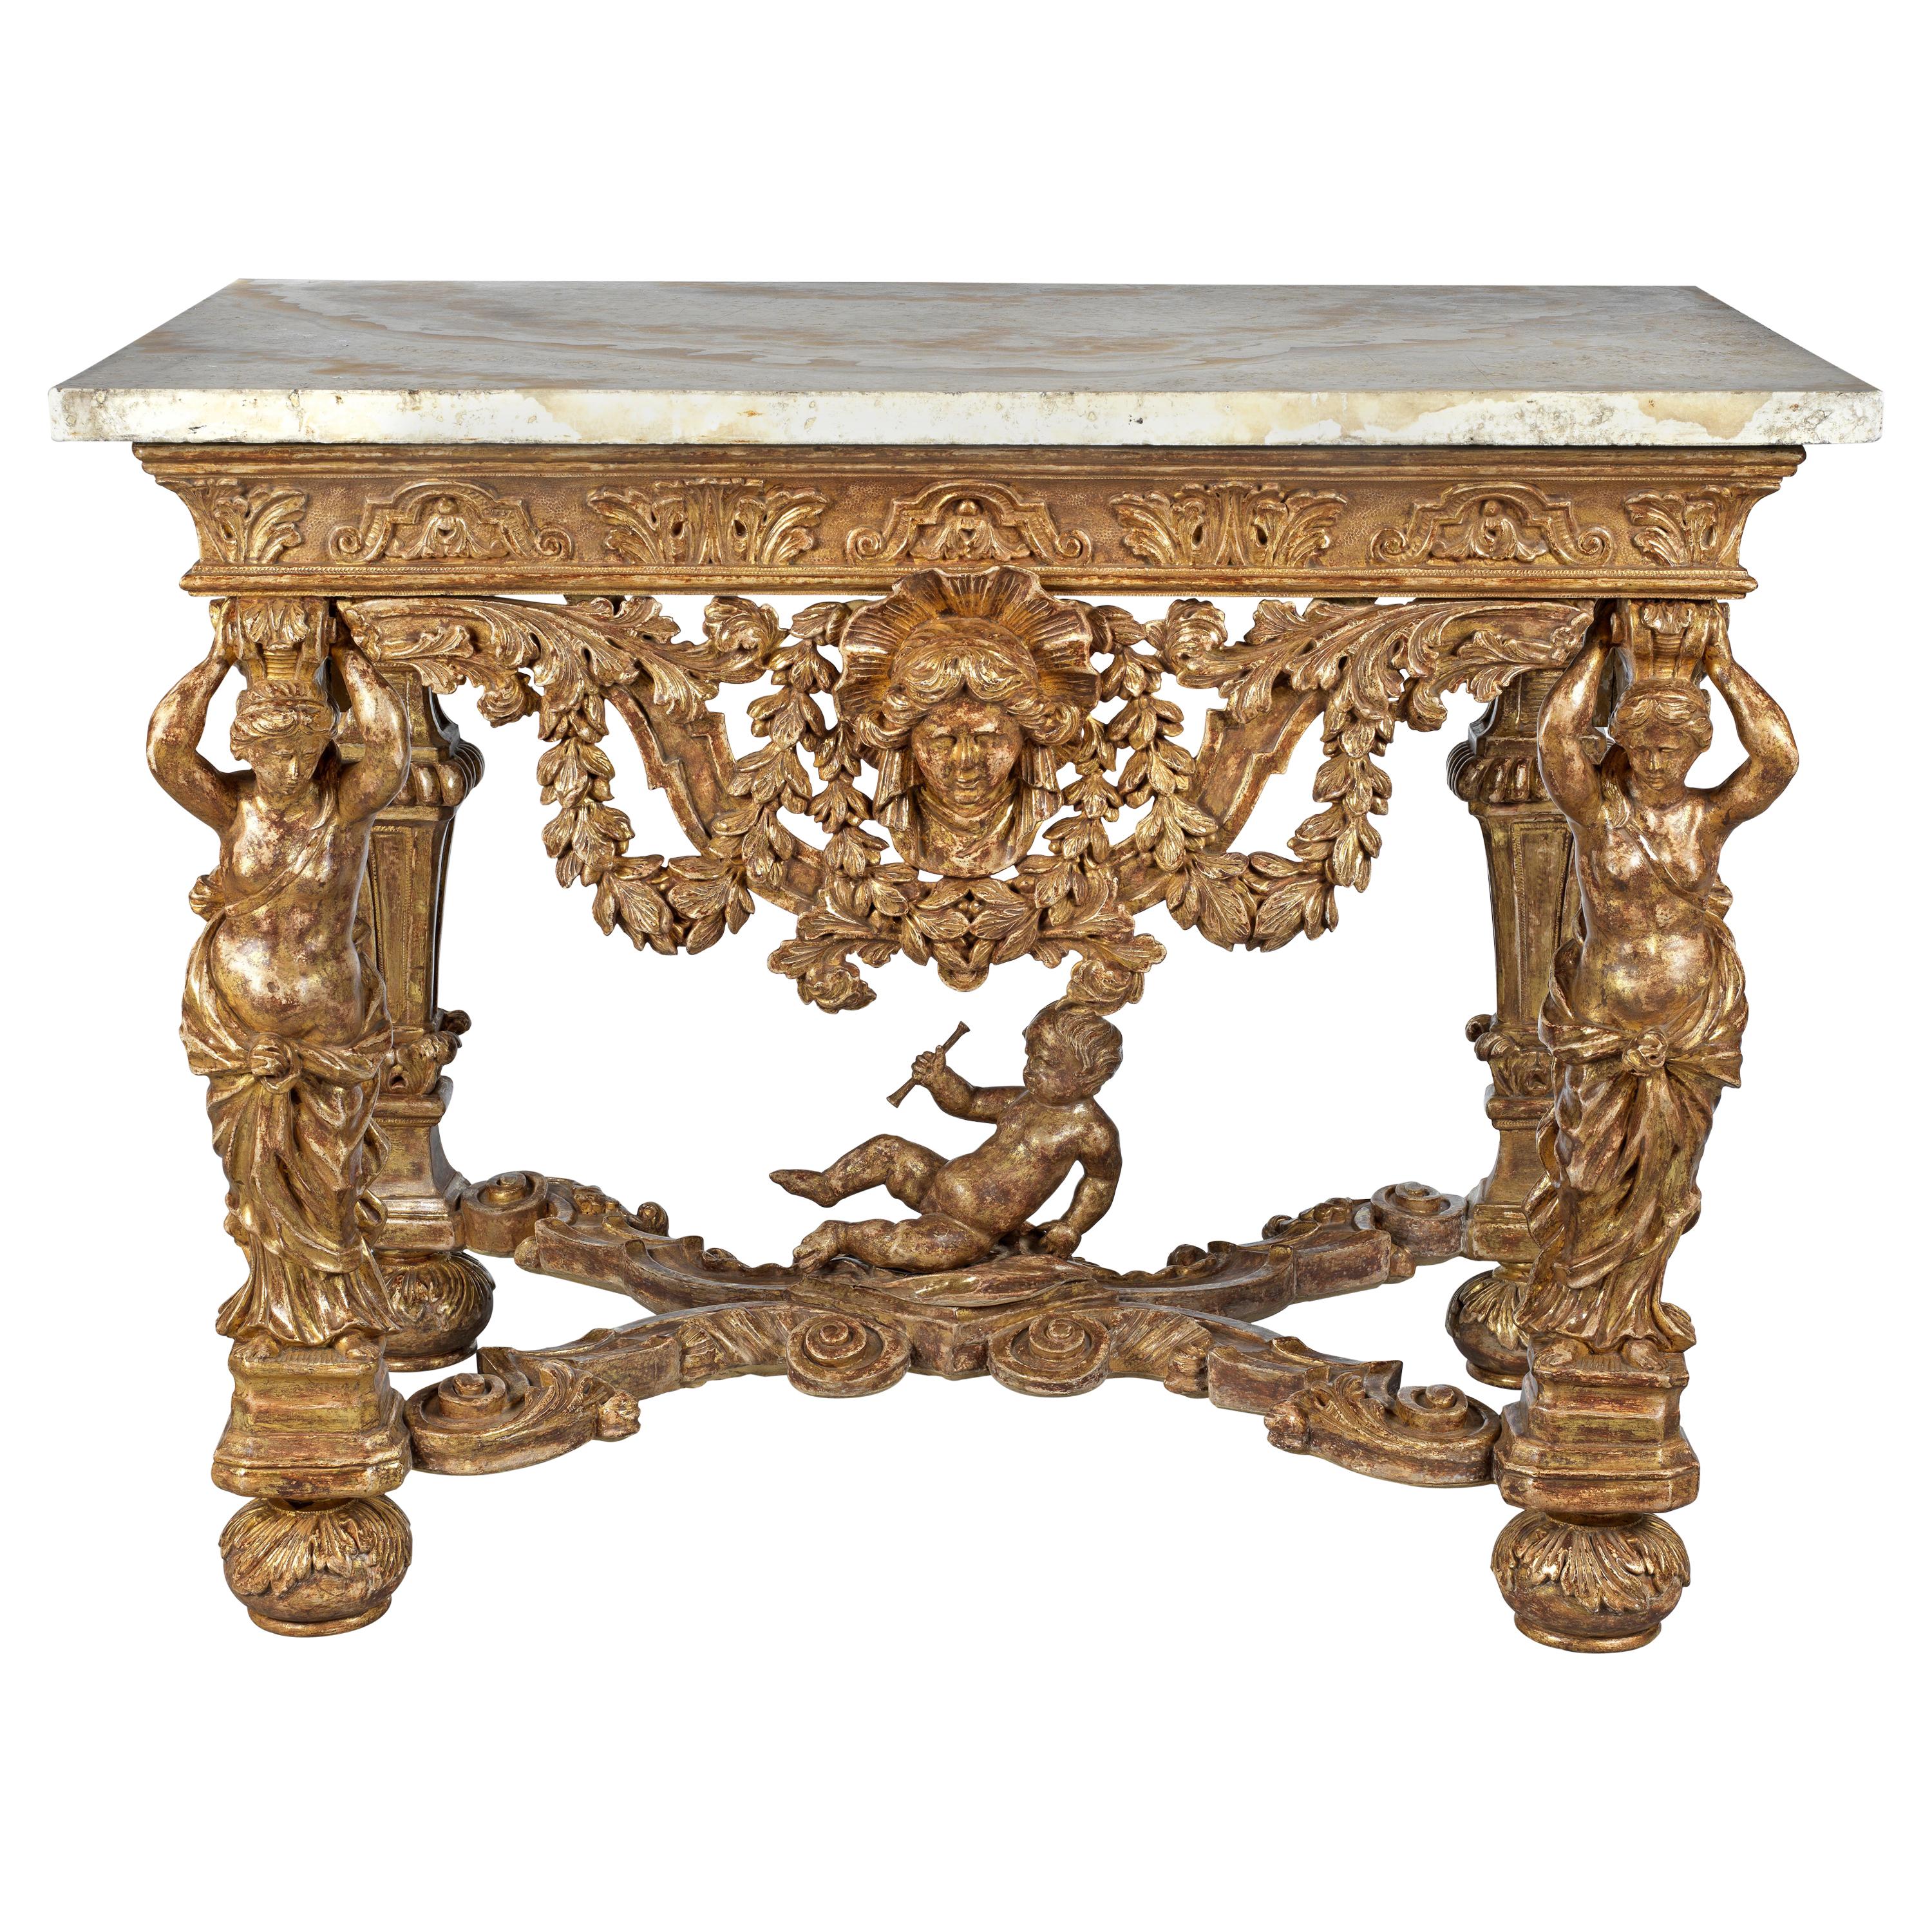 Fine Queen Anne Giltwood Pier Table with an Early Egyptian Alabaster Top im Angebot